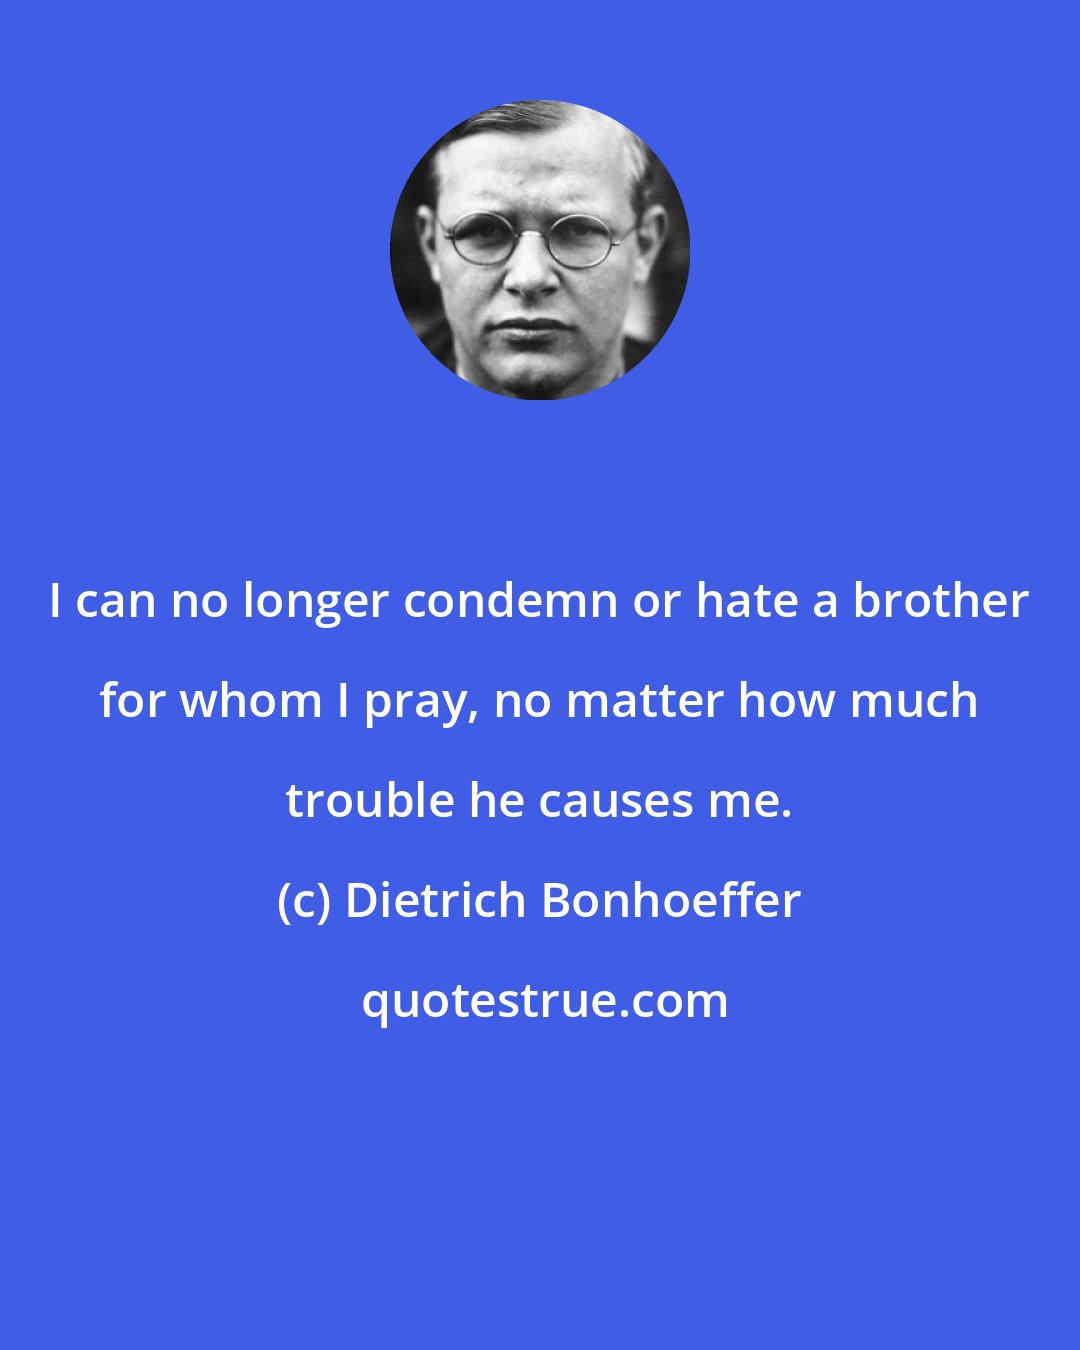 Dietrich Bonhoeffer: I can no longer condemn or hate a brother for whom I pray, no matter how much trouble he causes me.